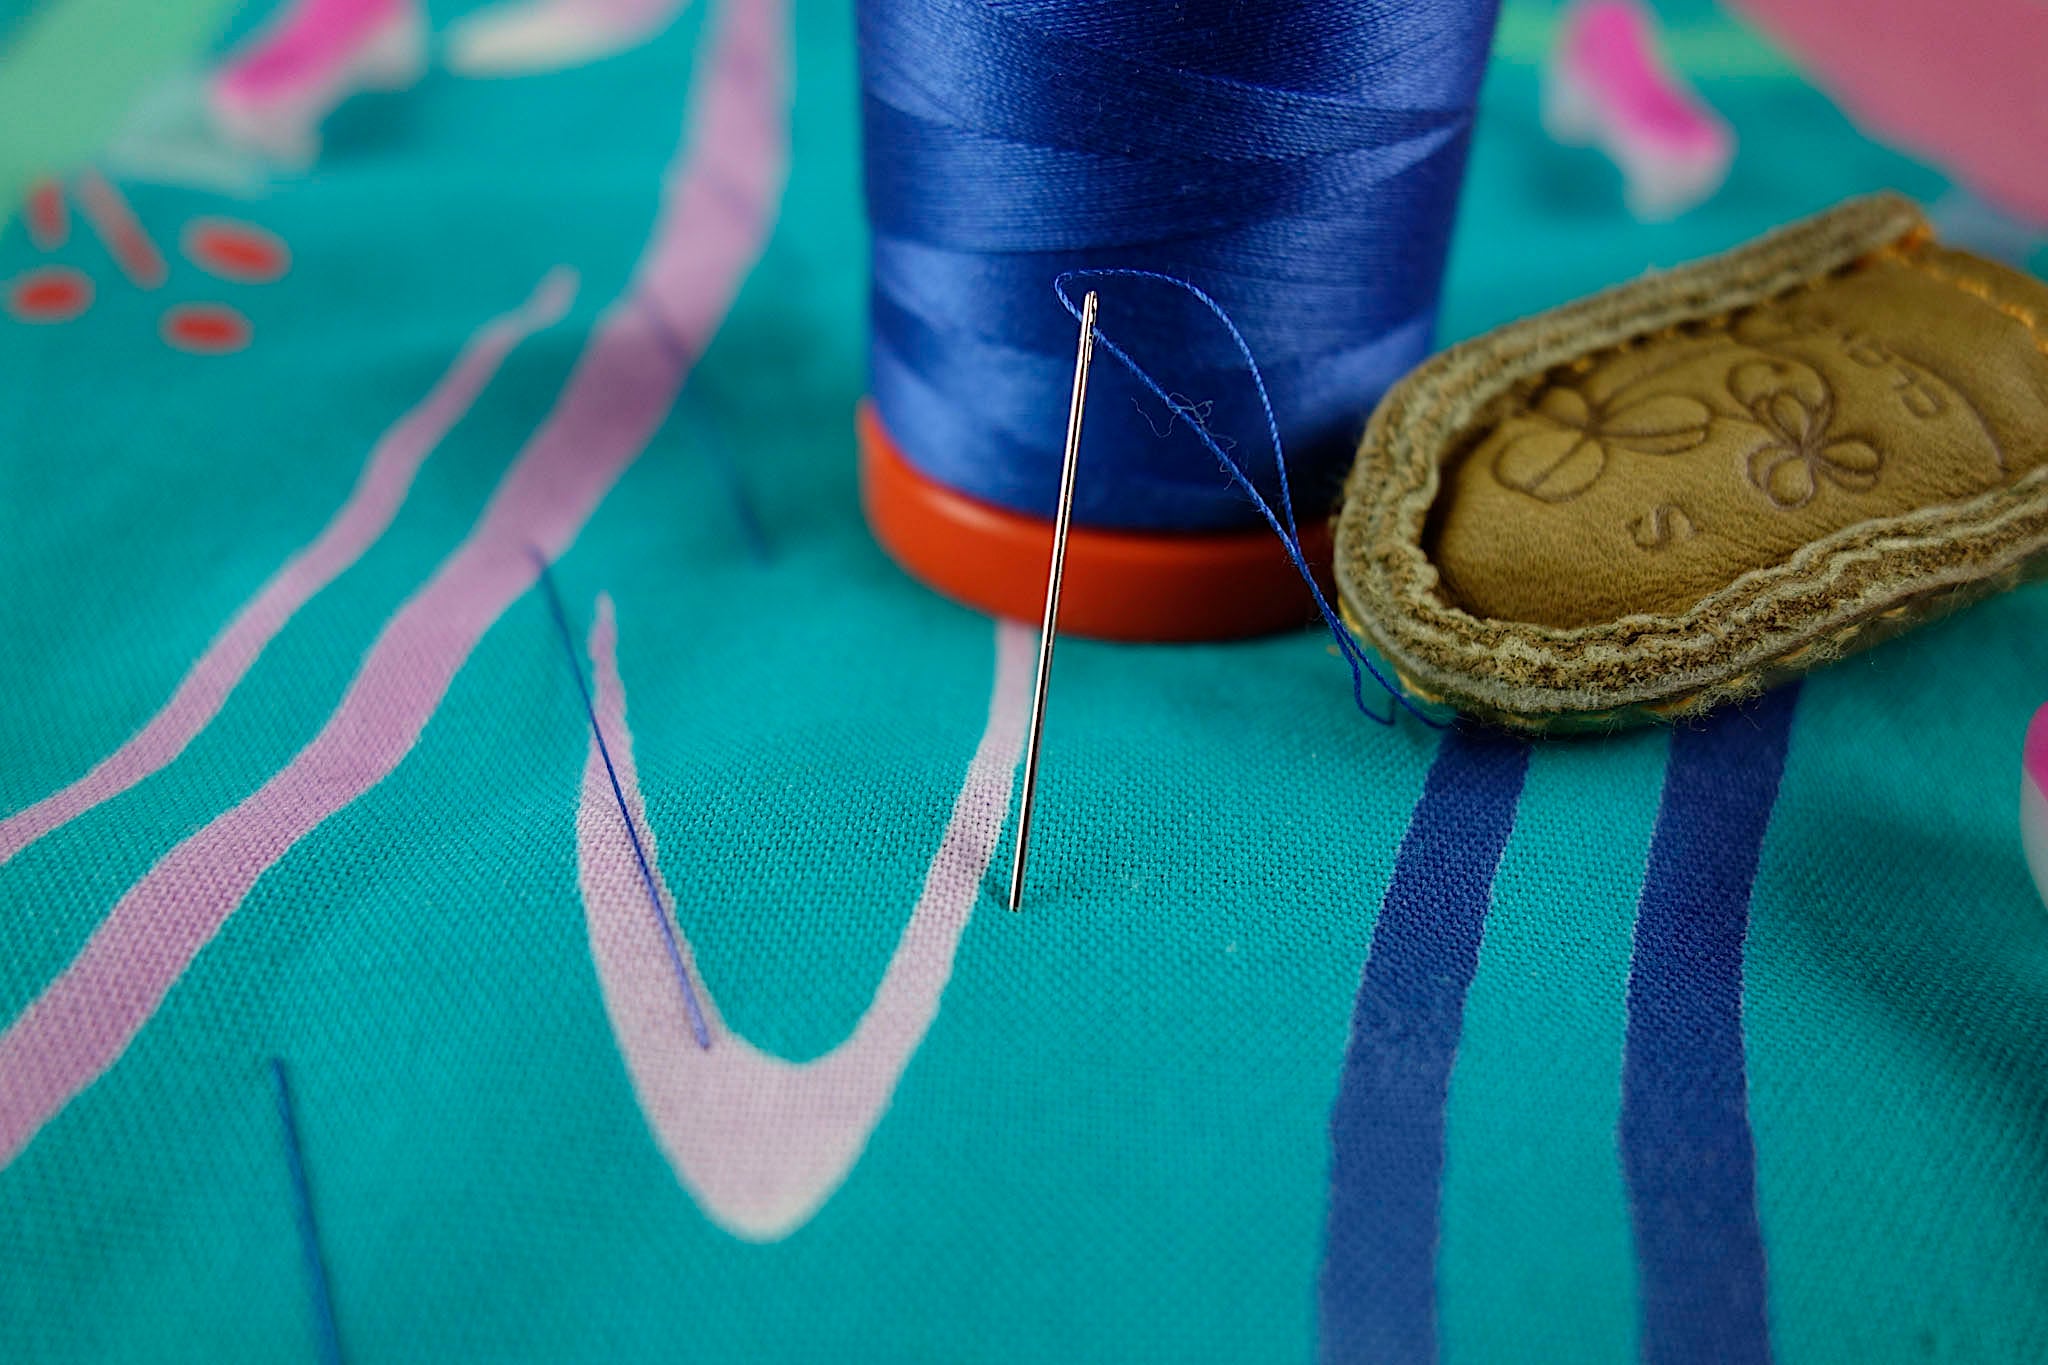 Tailor basting the quilt sandwich together